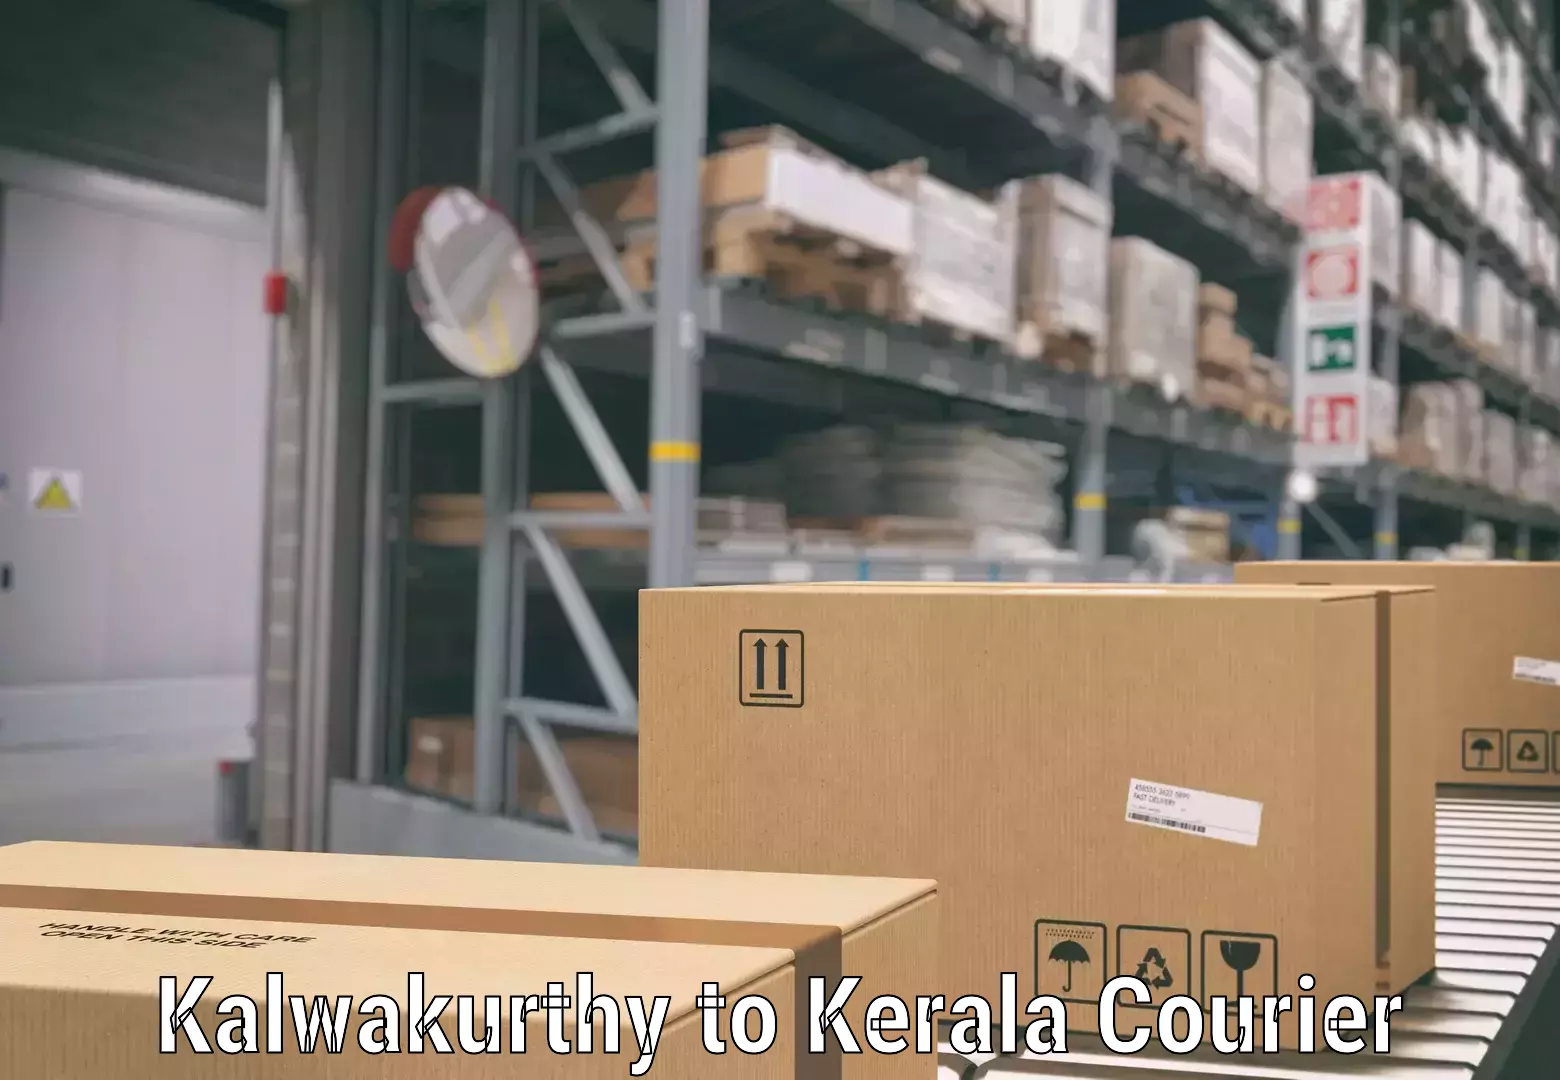 Luggage delivery operations Kalwakurthy to Kerala